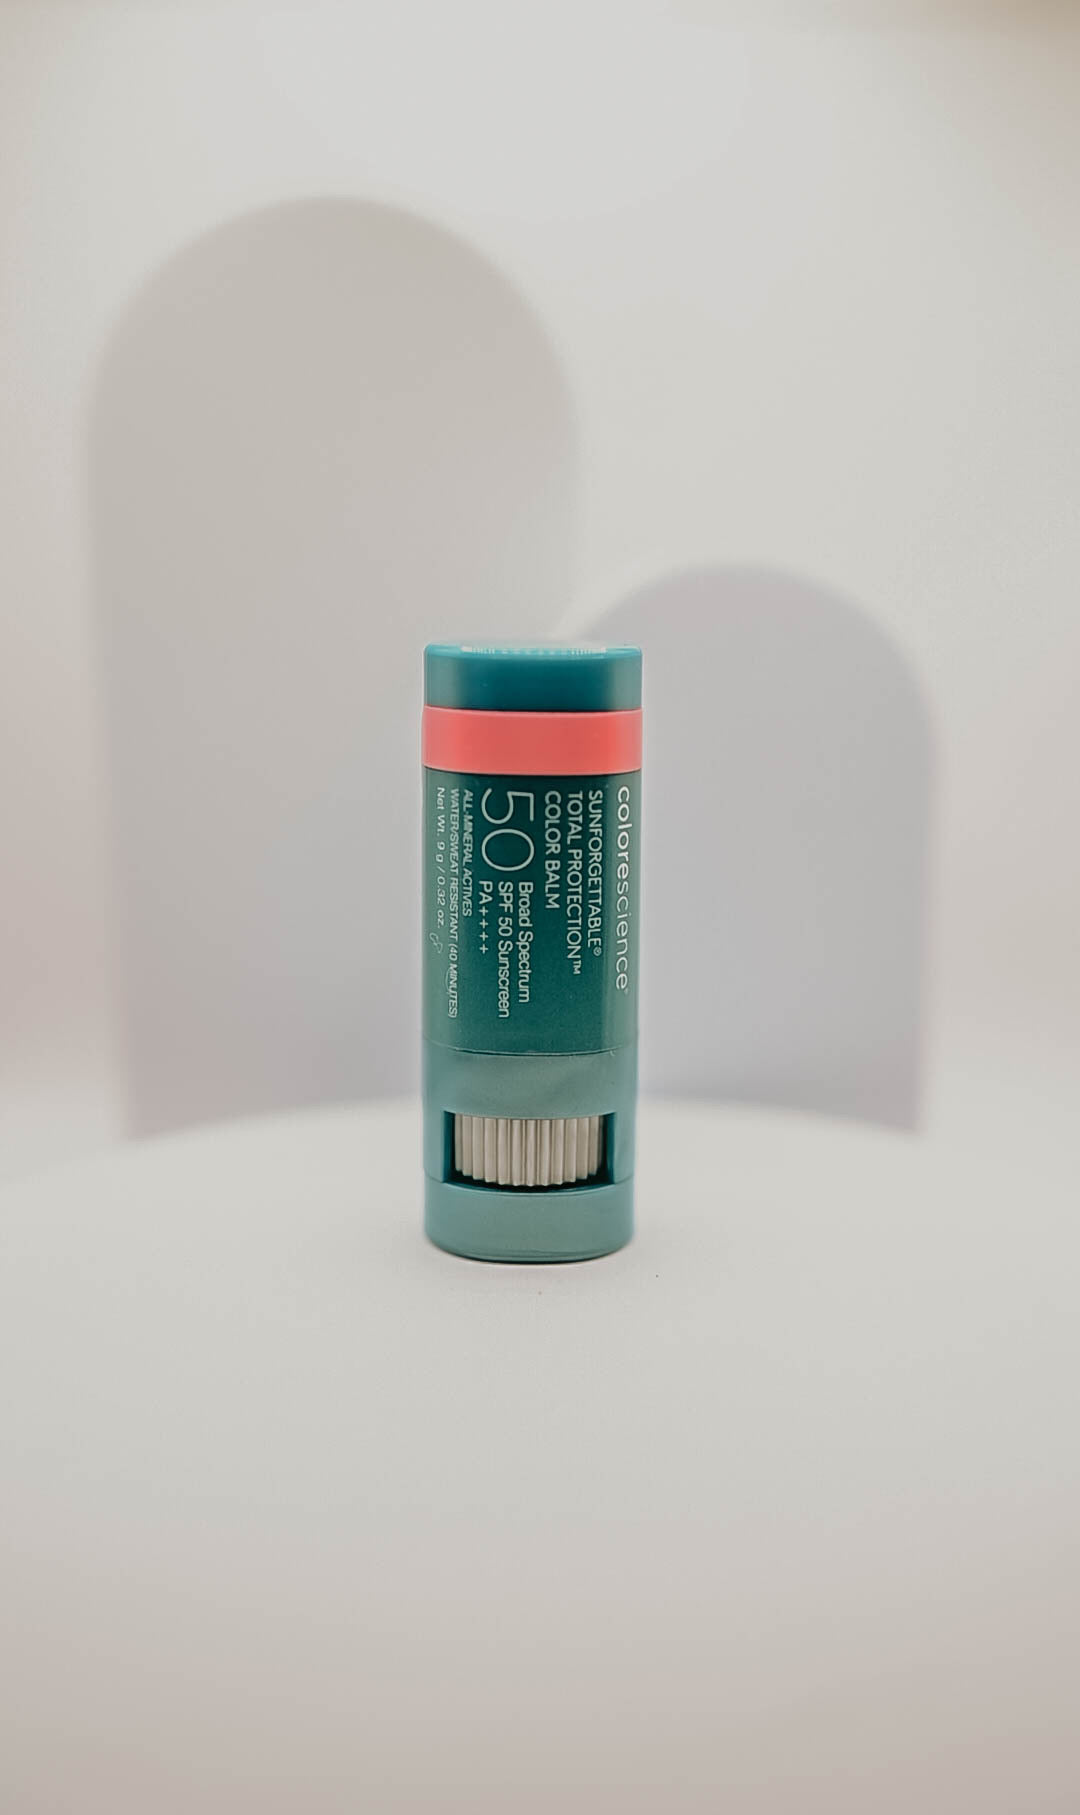 Sunforgettable® Total Protection™ Color Balm SPF 50